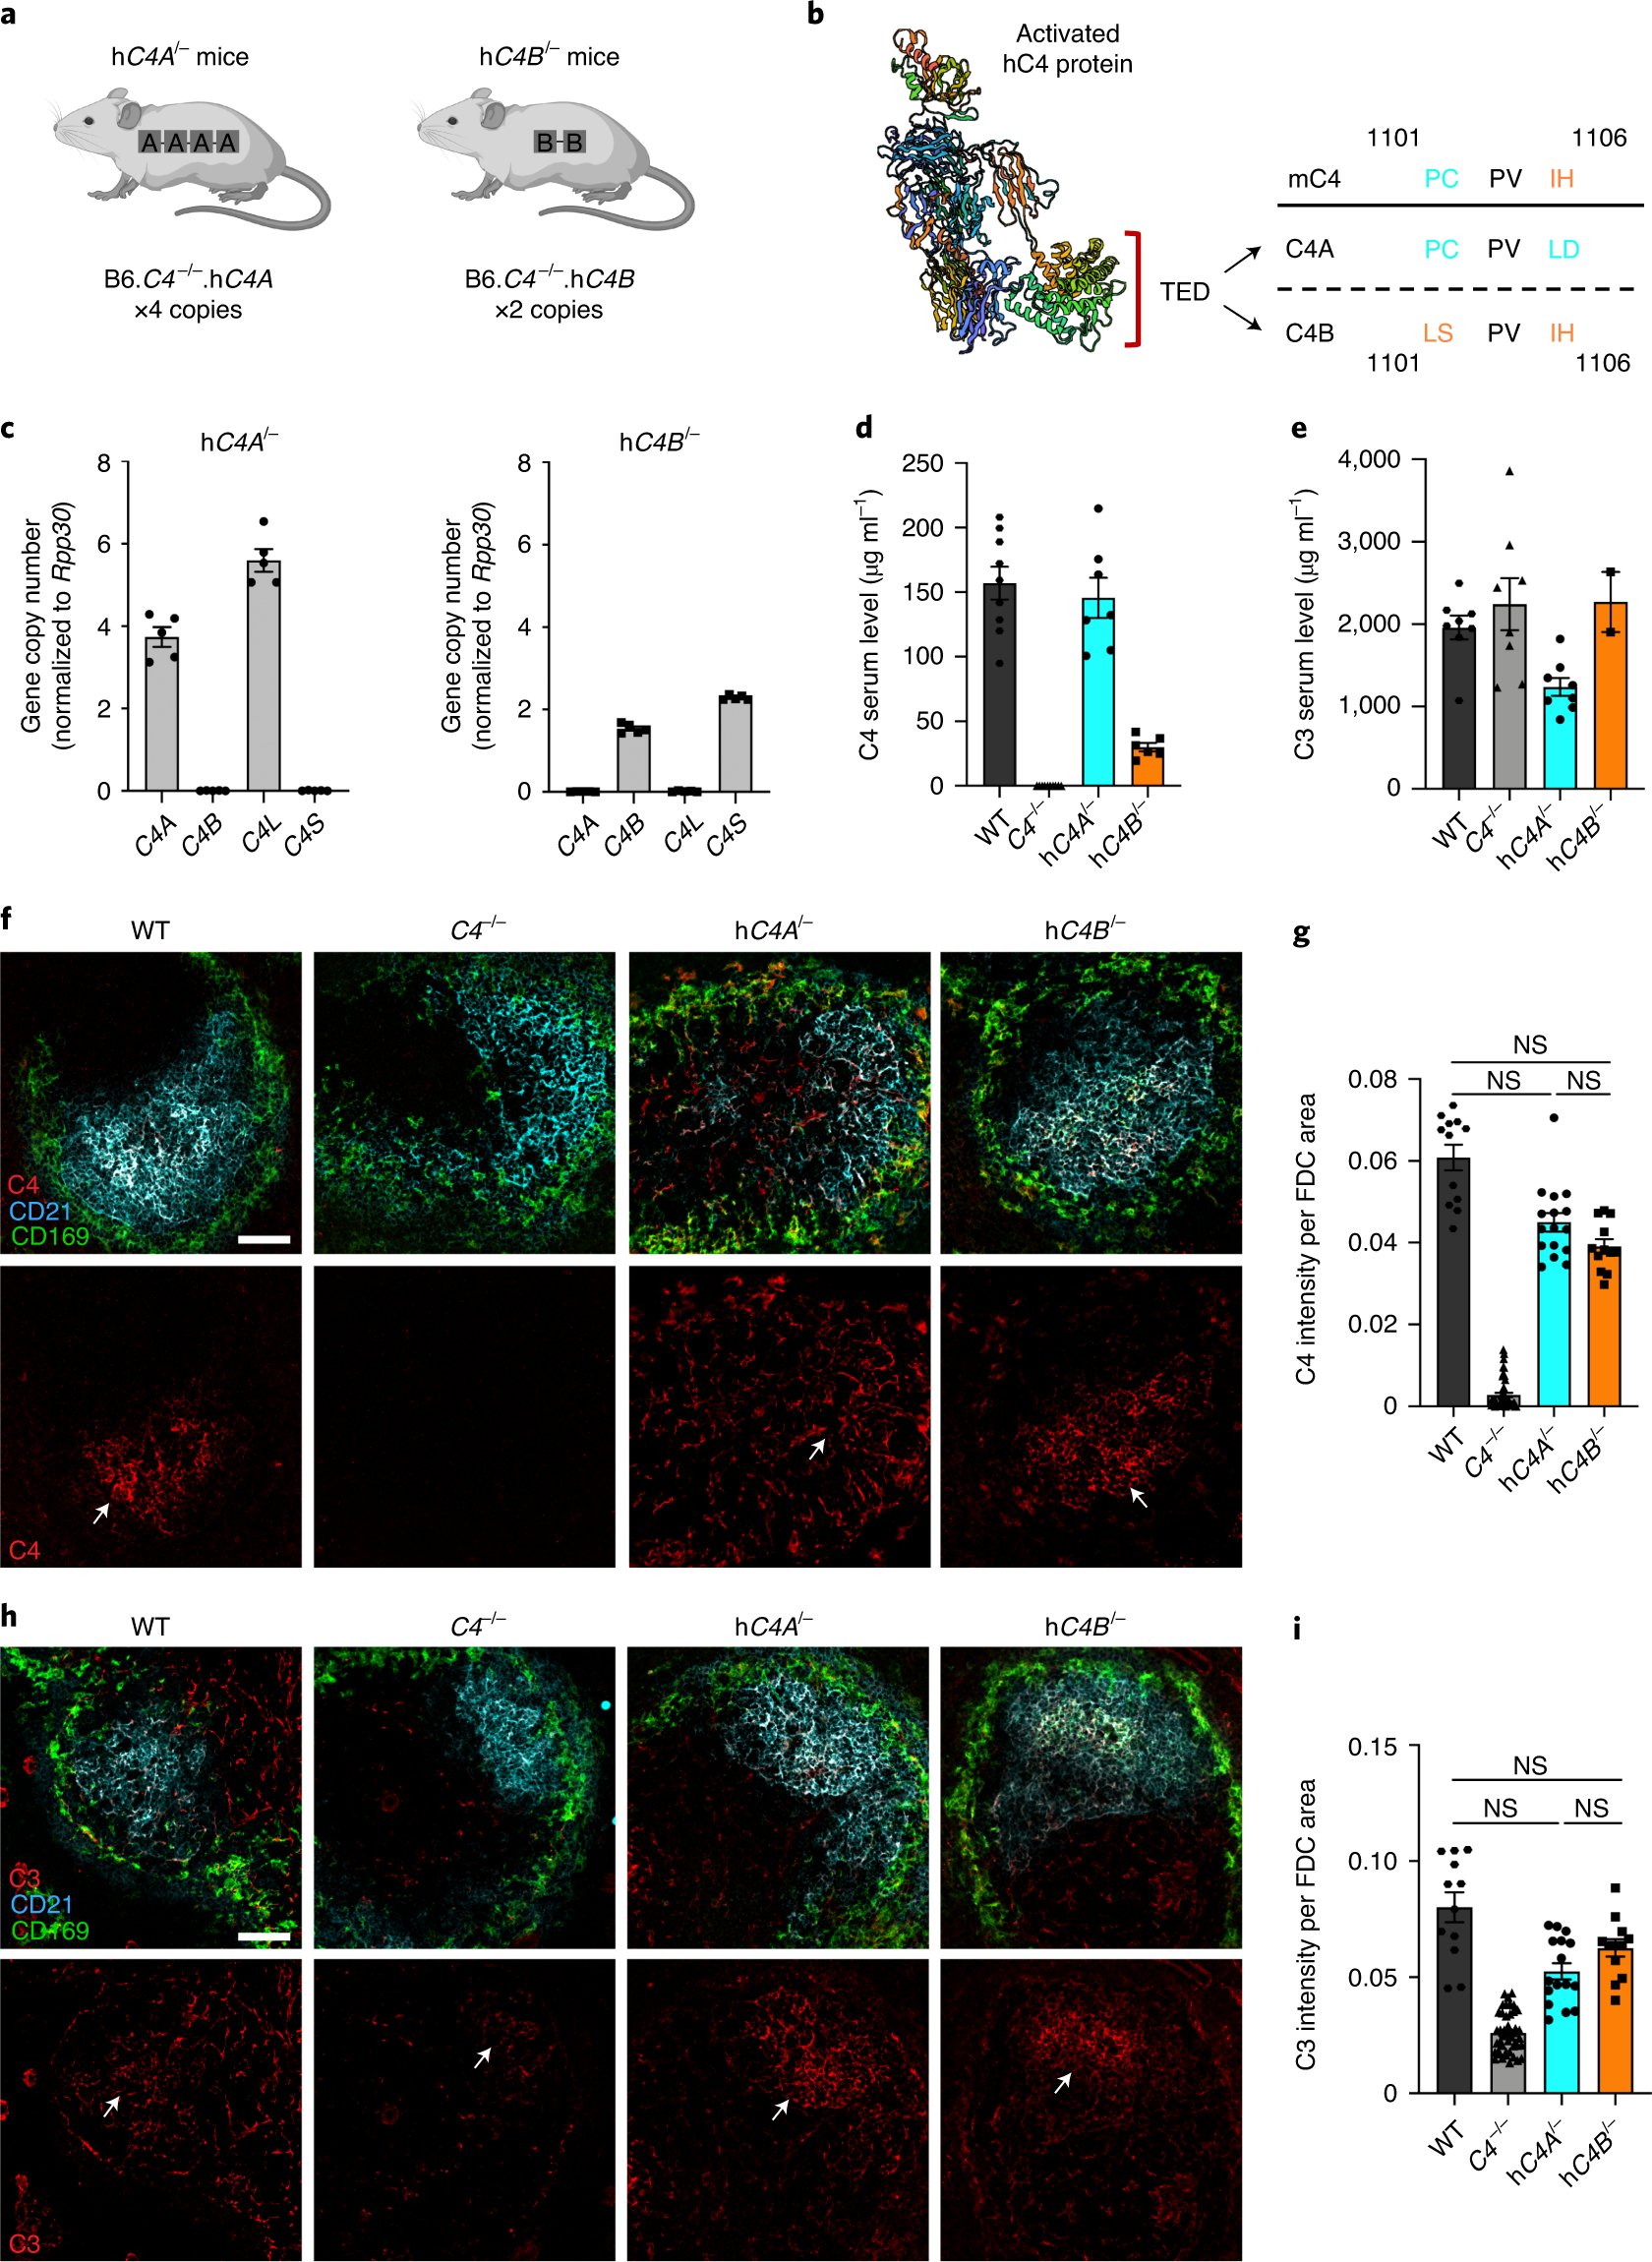 Overexpression of schizophrenia susceptibility factor human complement C4A  promotes excessive synaptic loss and behavioral changes in mice | Nature  Neuroscience